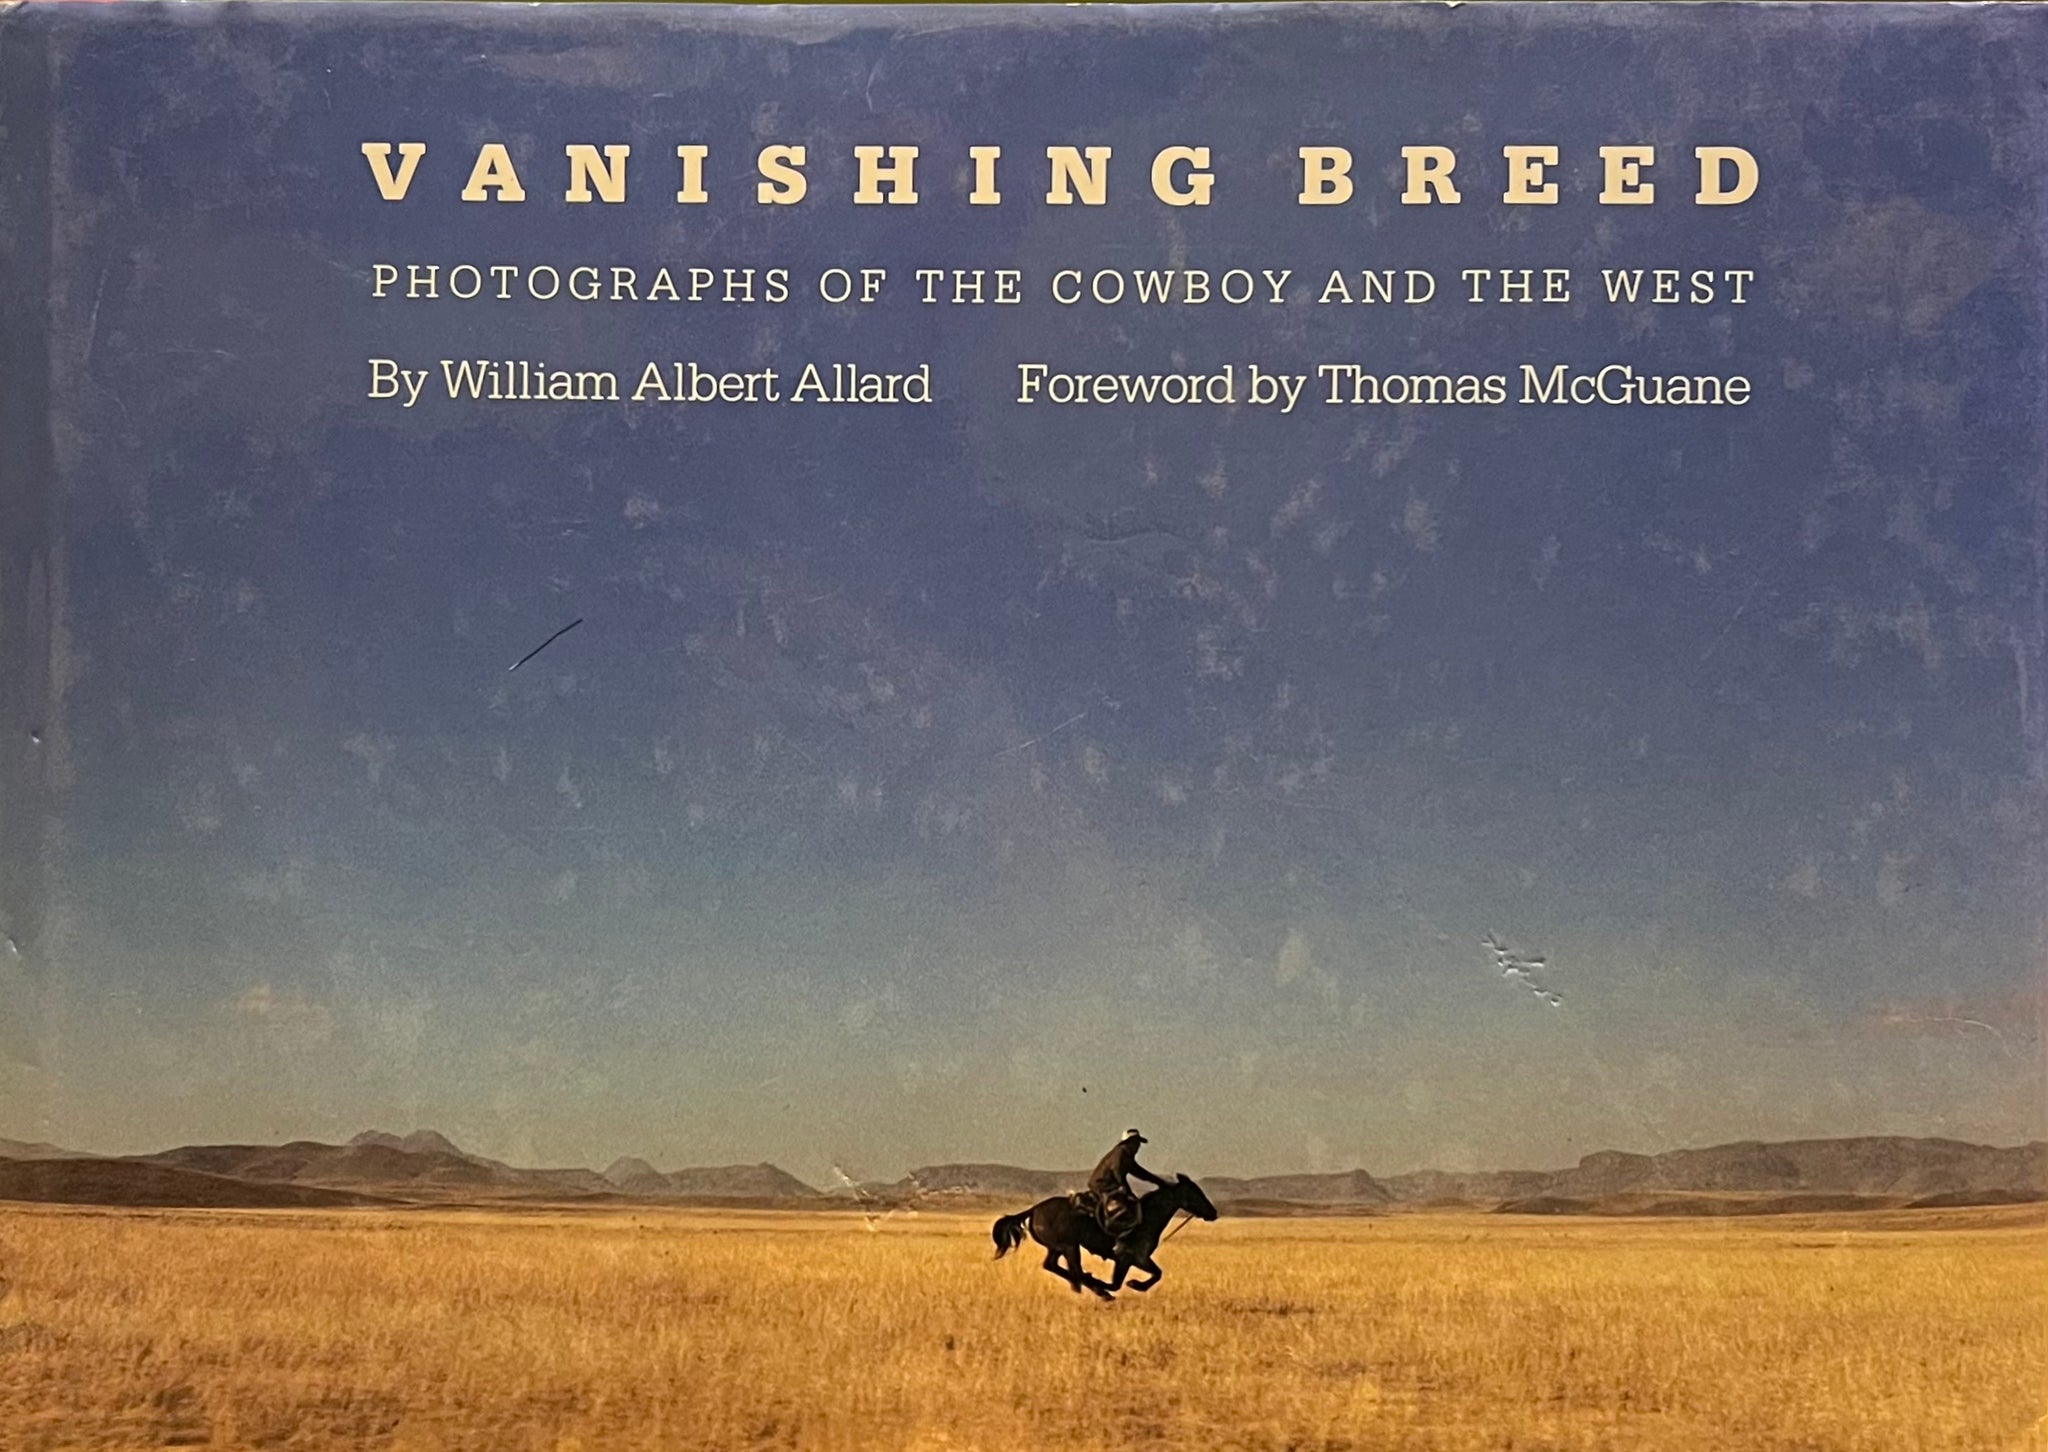 Vanishing Breed: Photographs of the Cowboy and the West, William Albert Allard